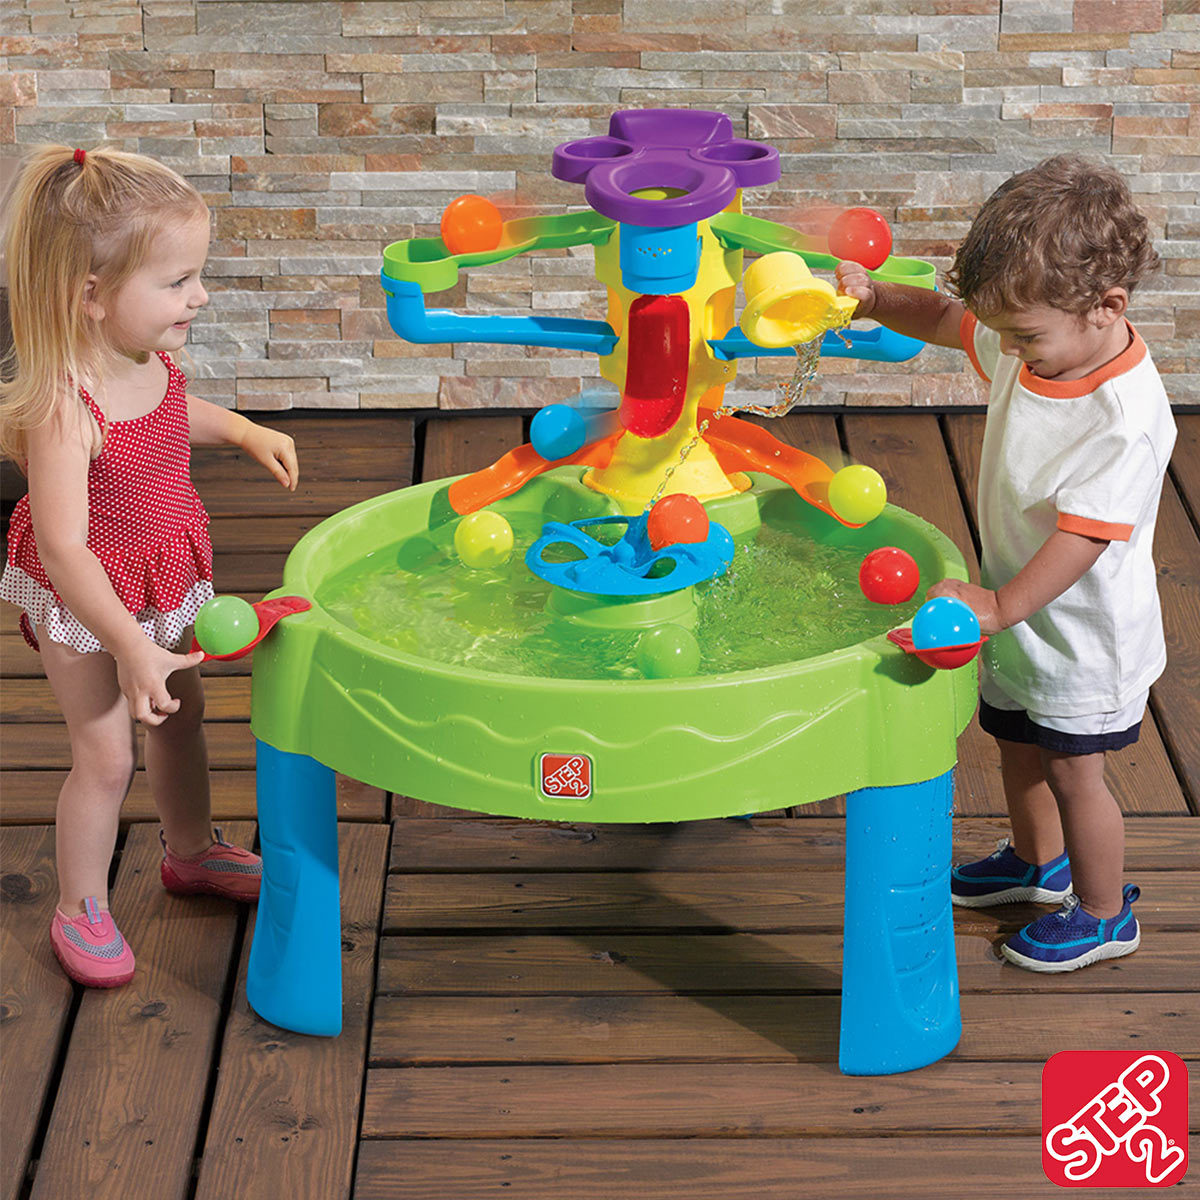 costco water table toy